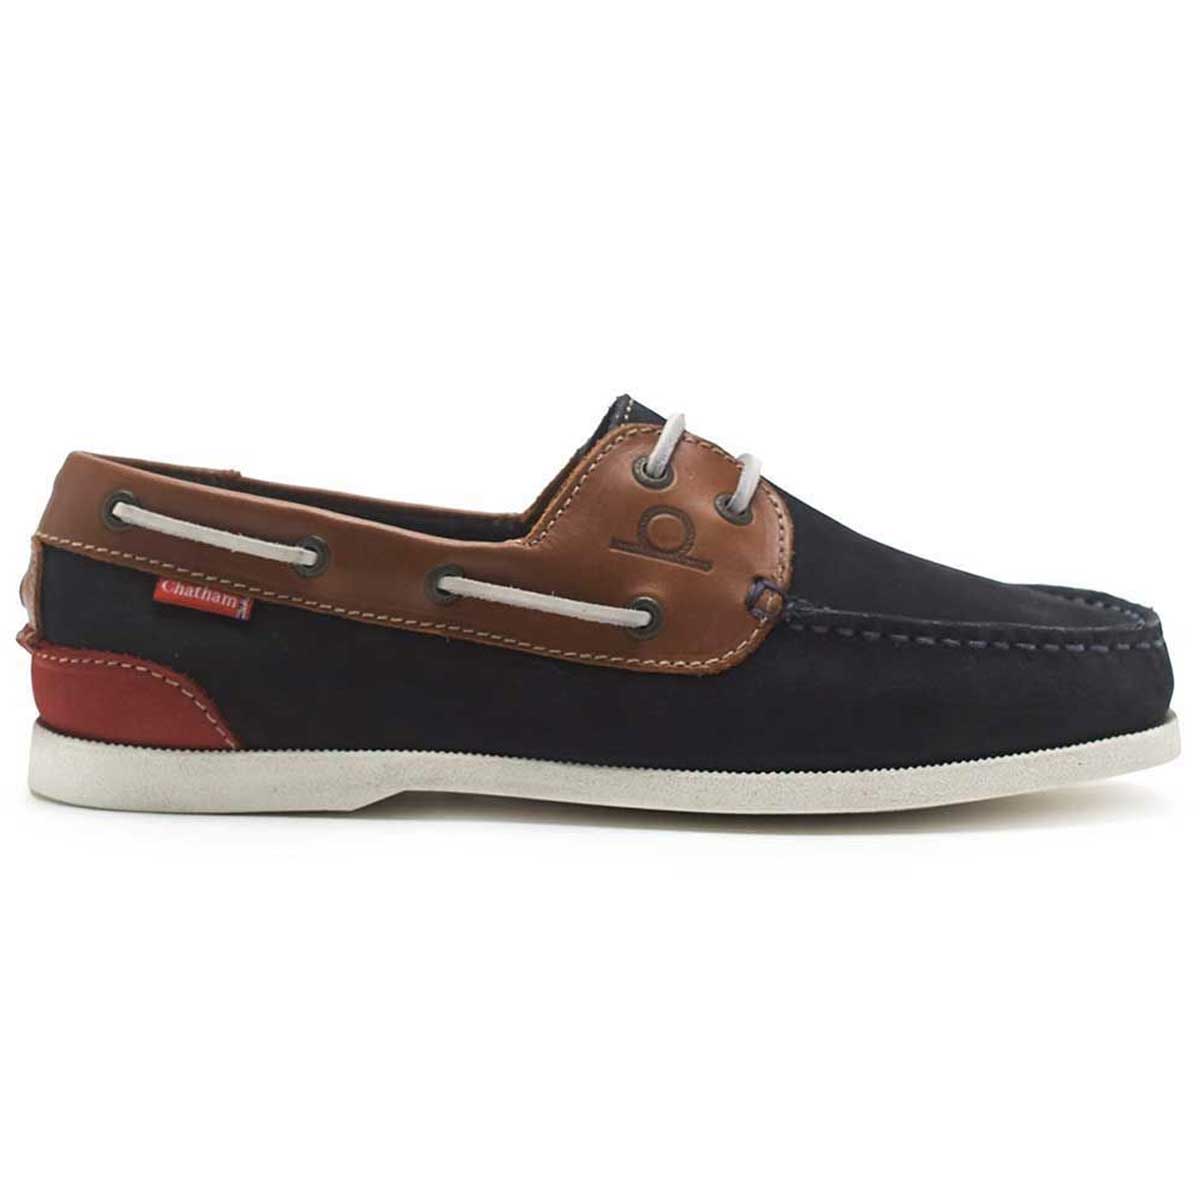 CHATHAM Galley II Leather Boat Shoes - Men's - Navy / Tan